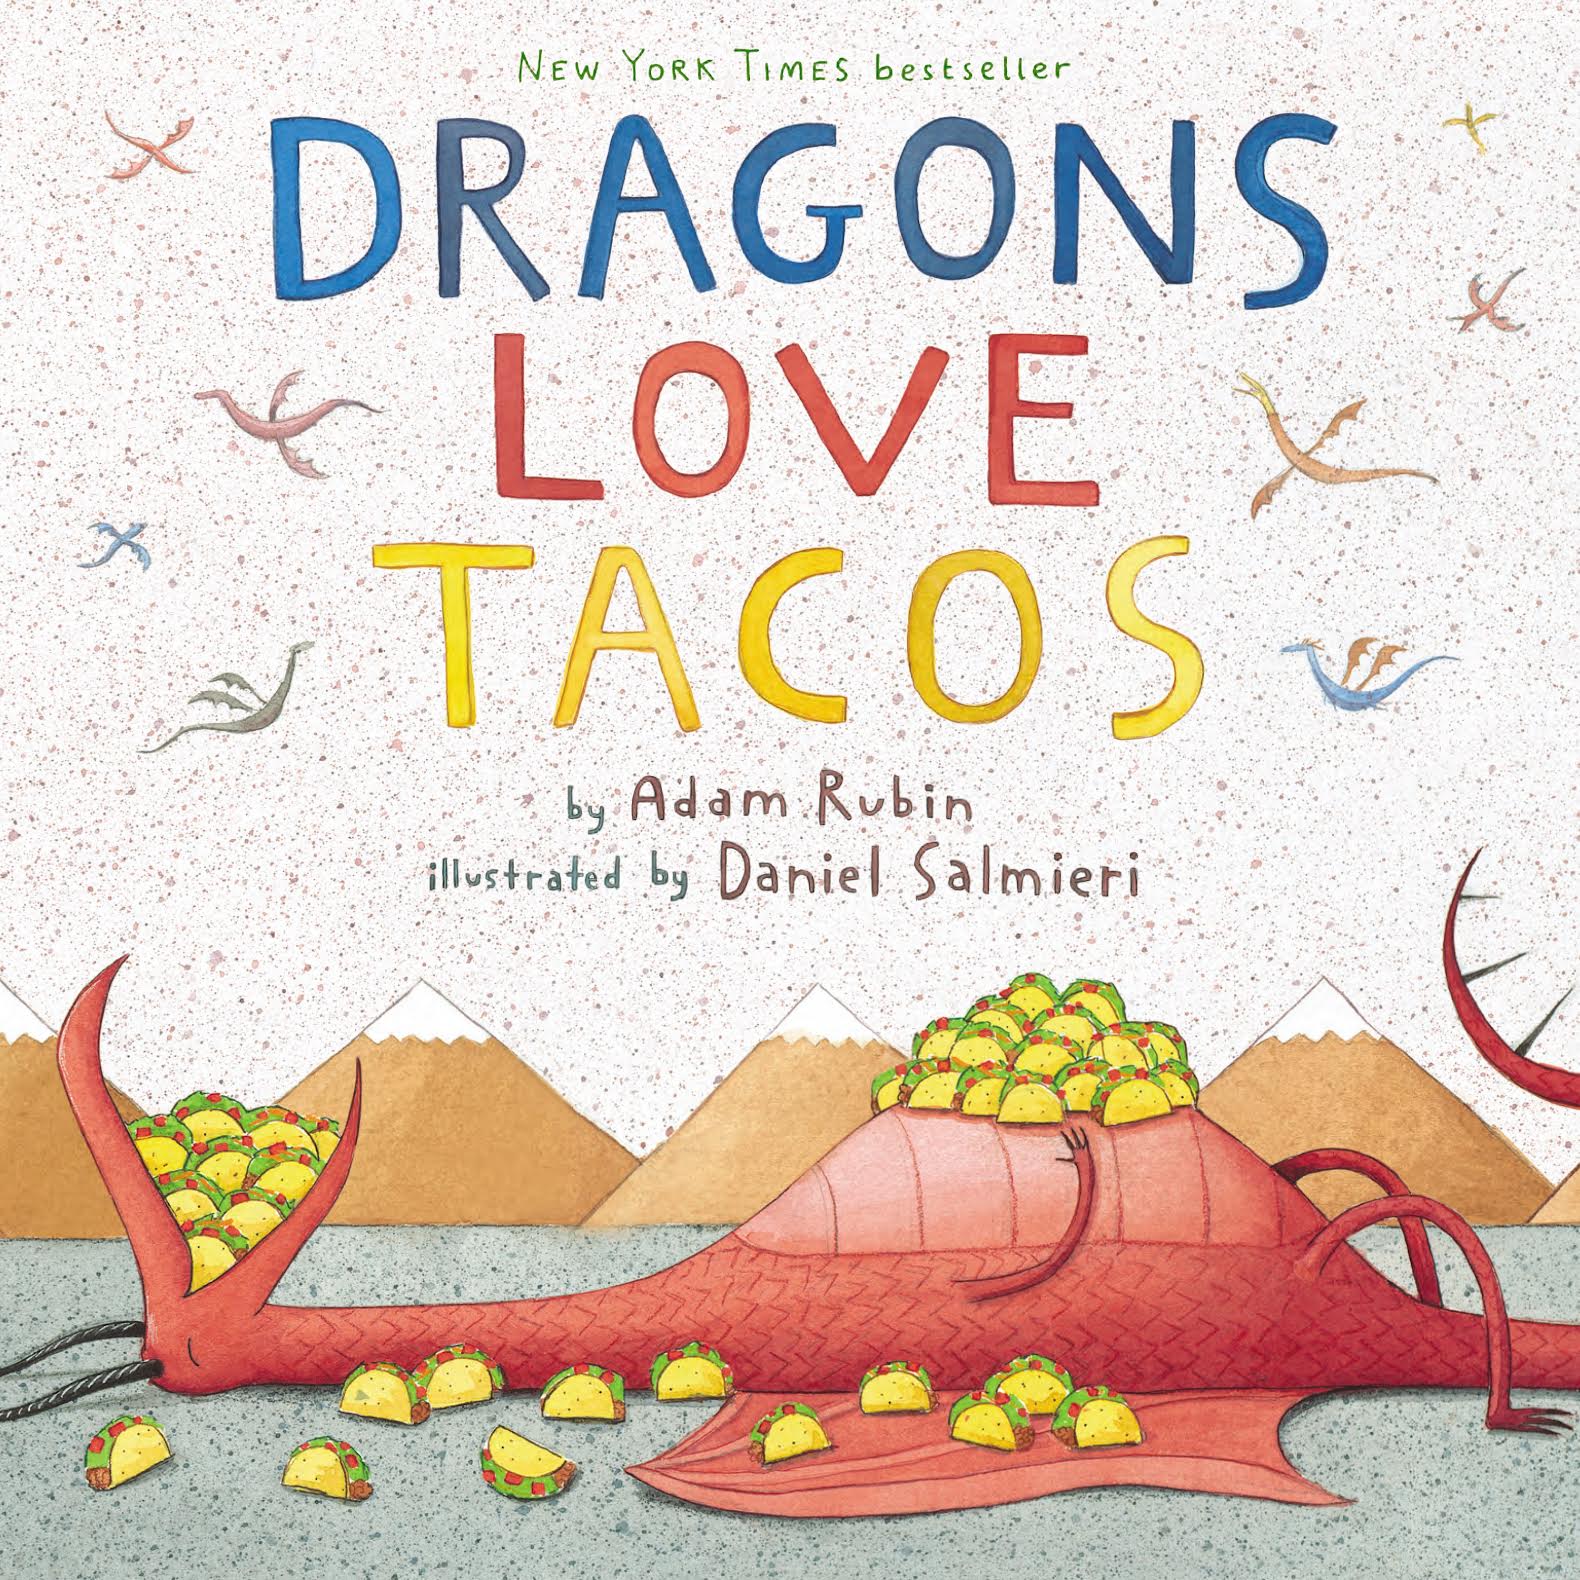 Dual Interview Special: Adam Rubin and Daniel Salmieri Dish Dirt on the Dragons Love Tacos 10-Year Anniversary!